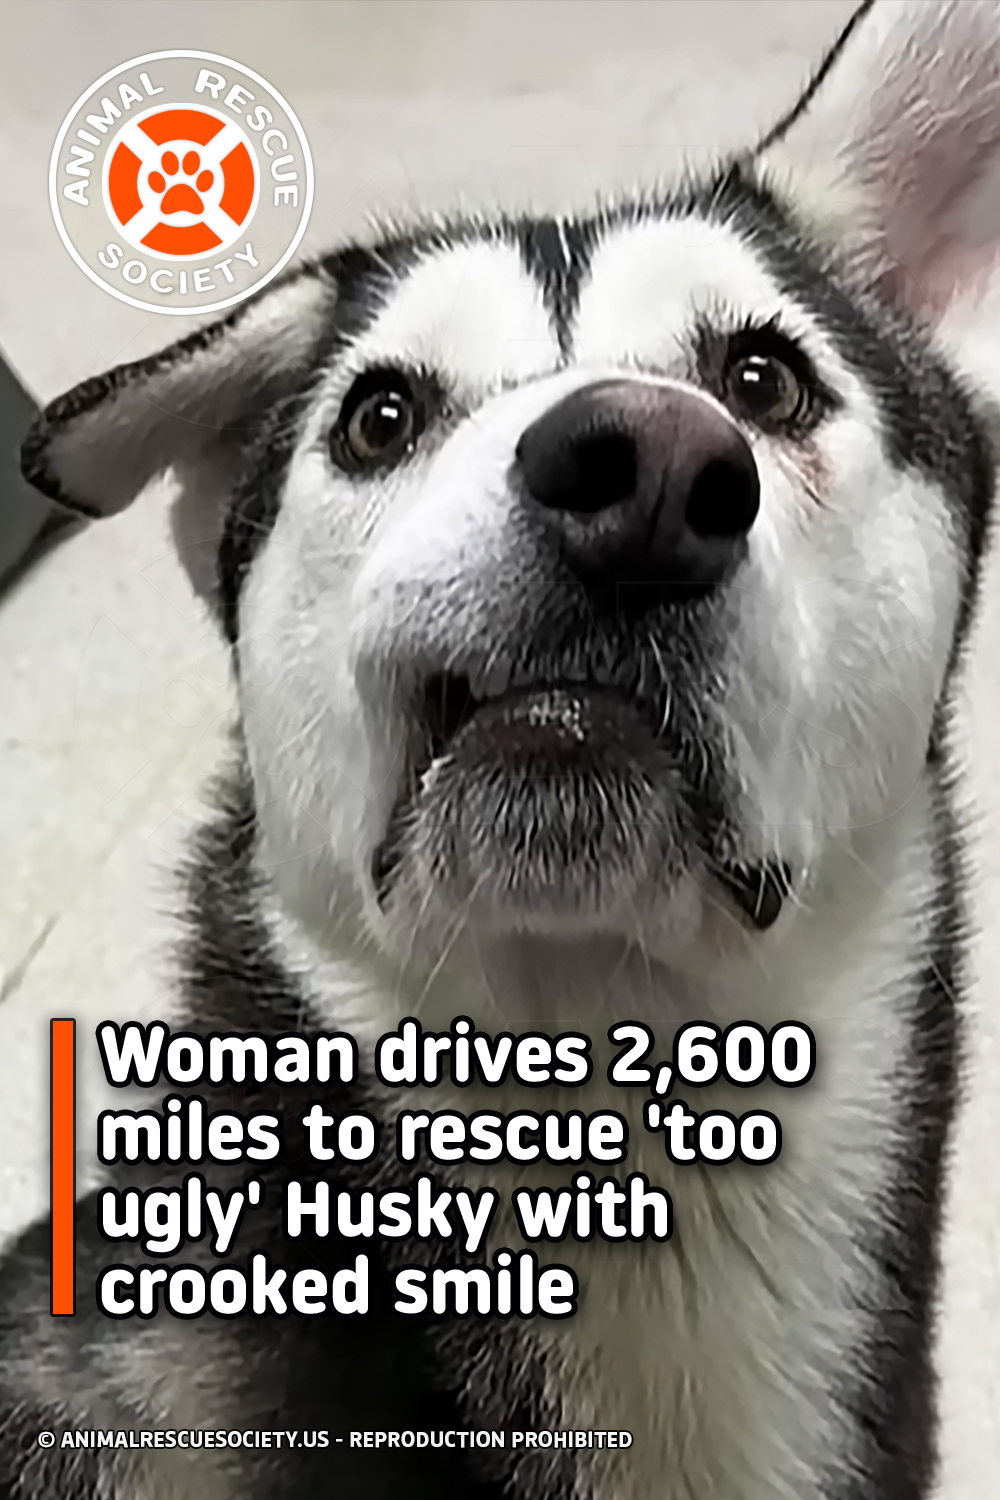 Woman drives 2,600 miles to rescue \'too ugly\' Husky with crooked smile